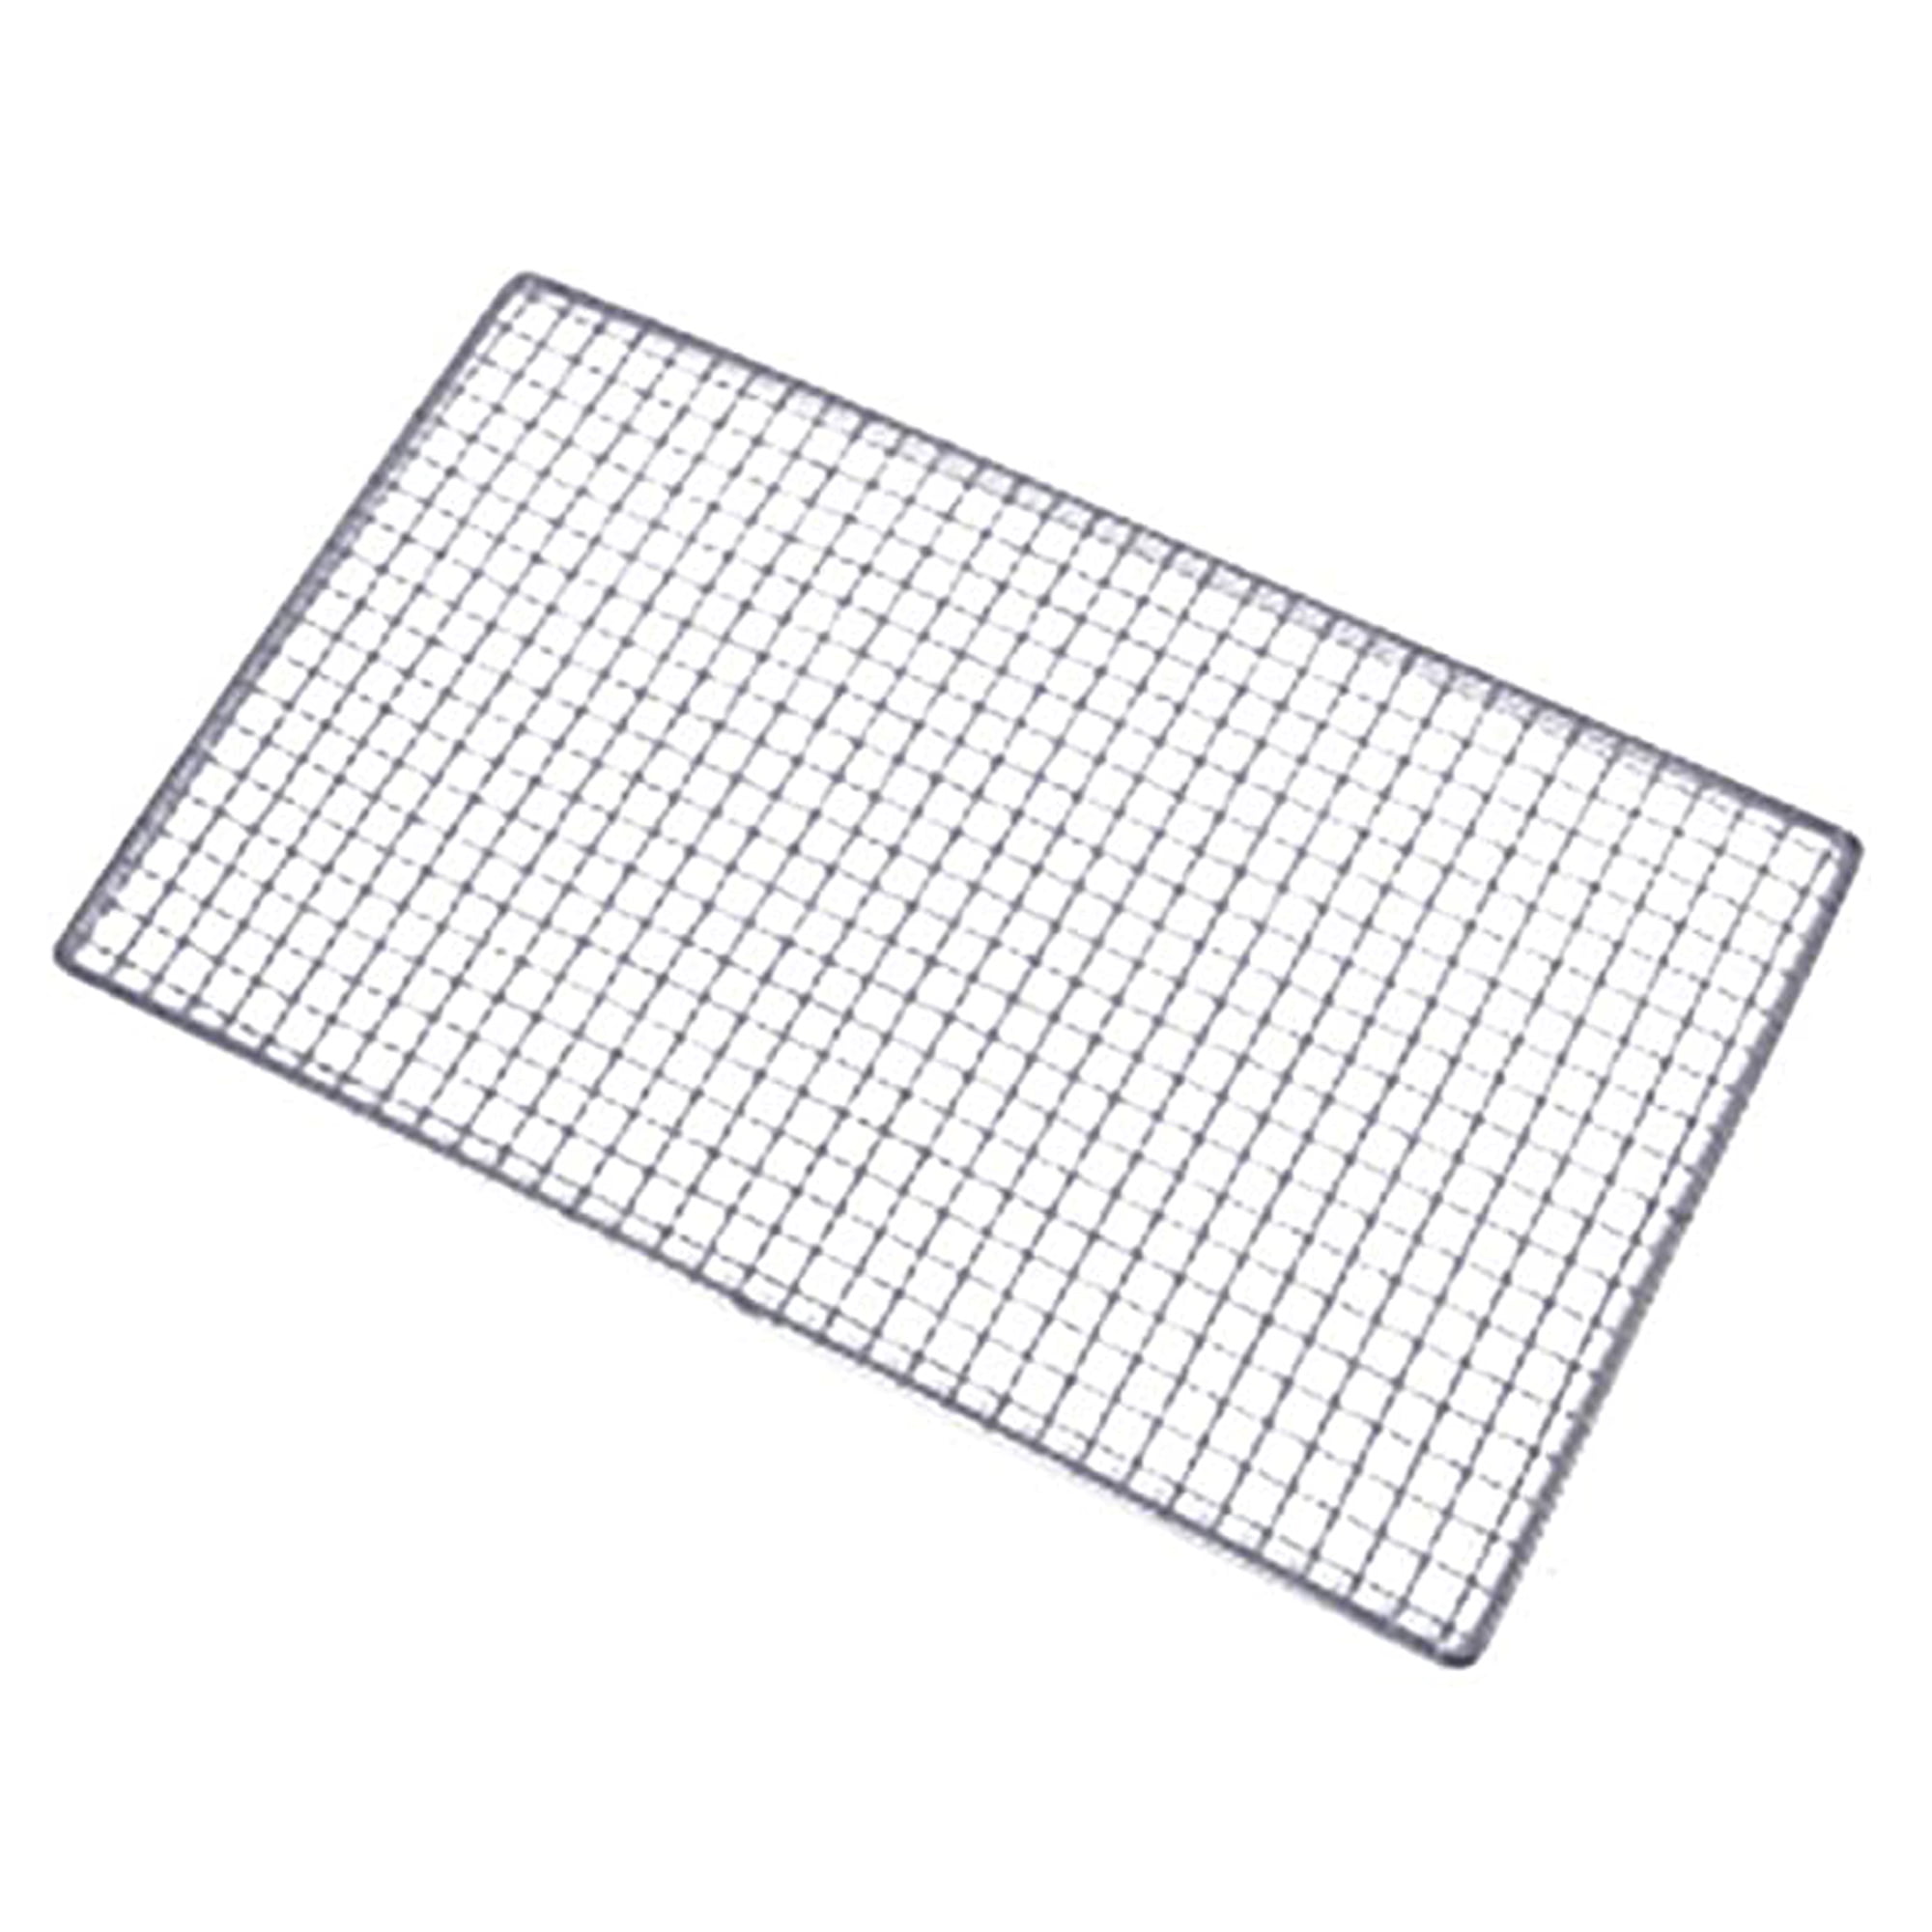 Stainless Steel BBQ Grill Grate Grid Wire Mesh Rack Net Replacement Cooking 